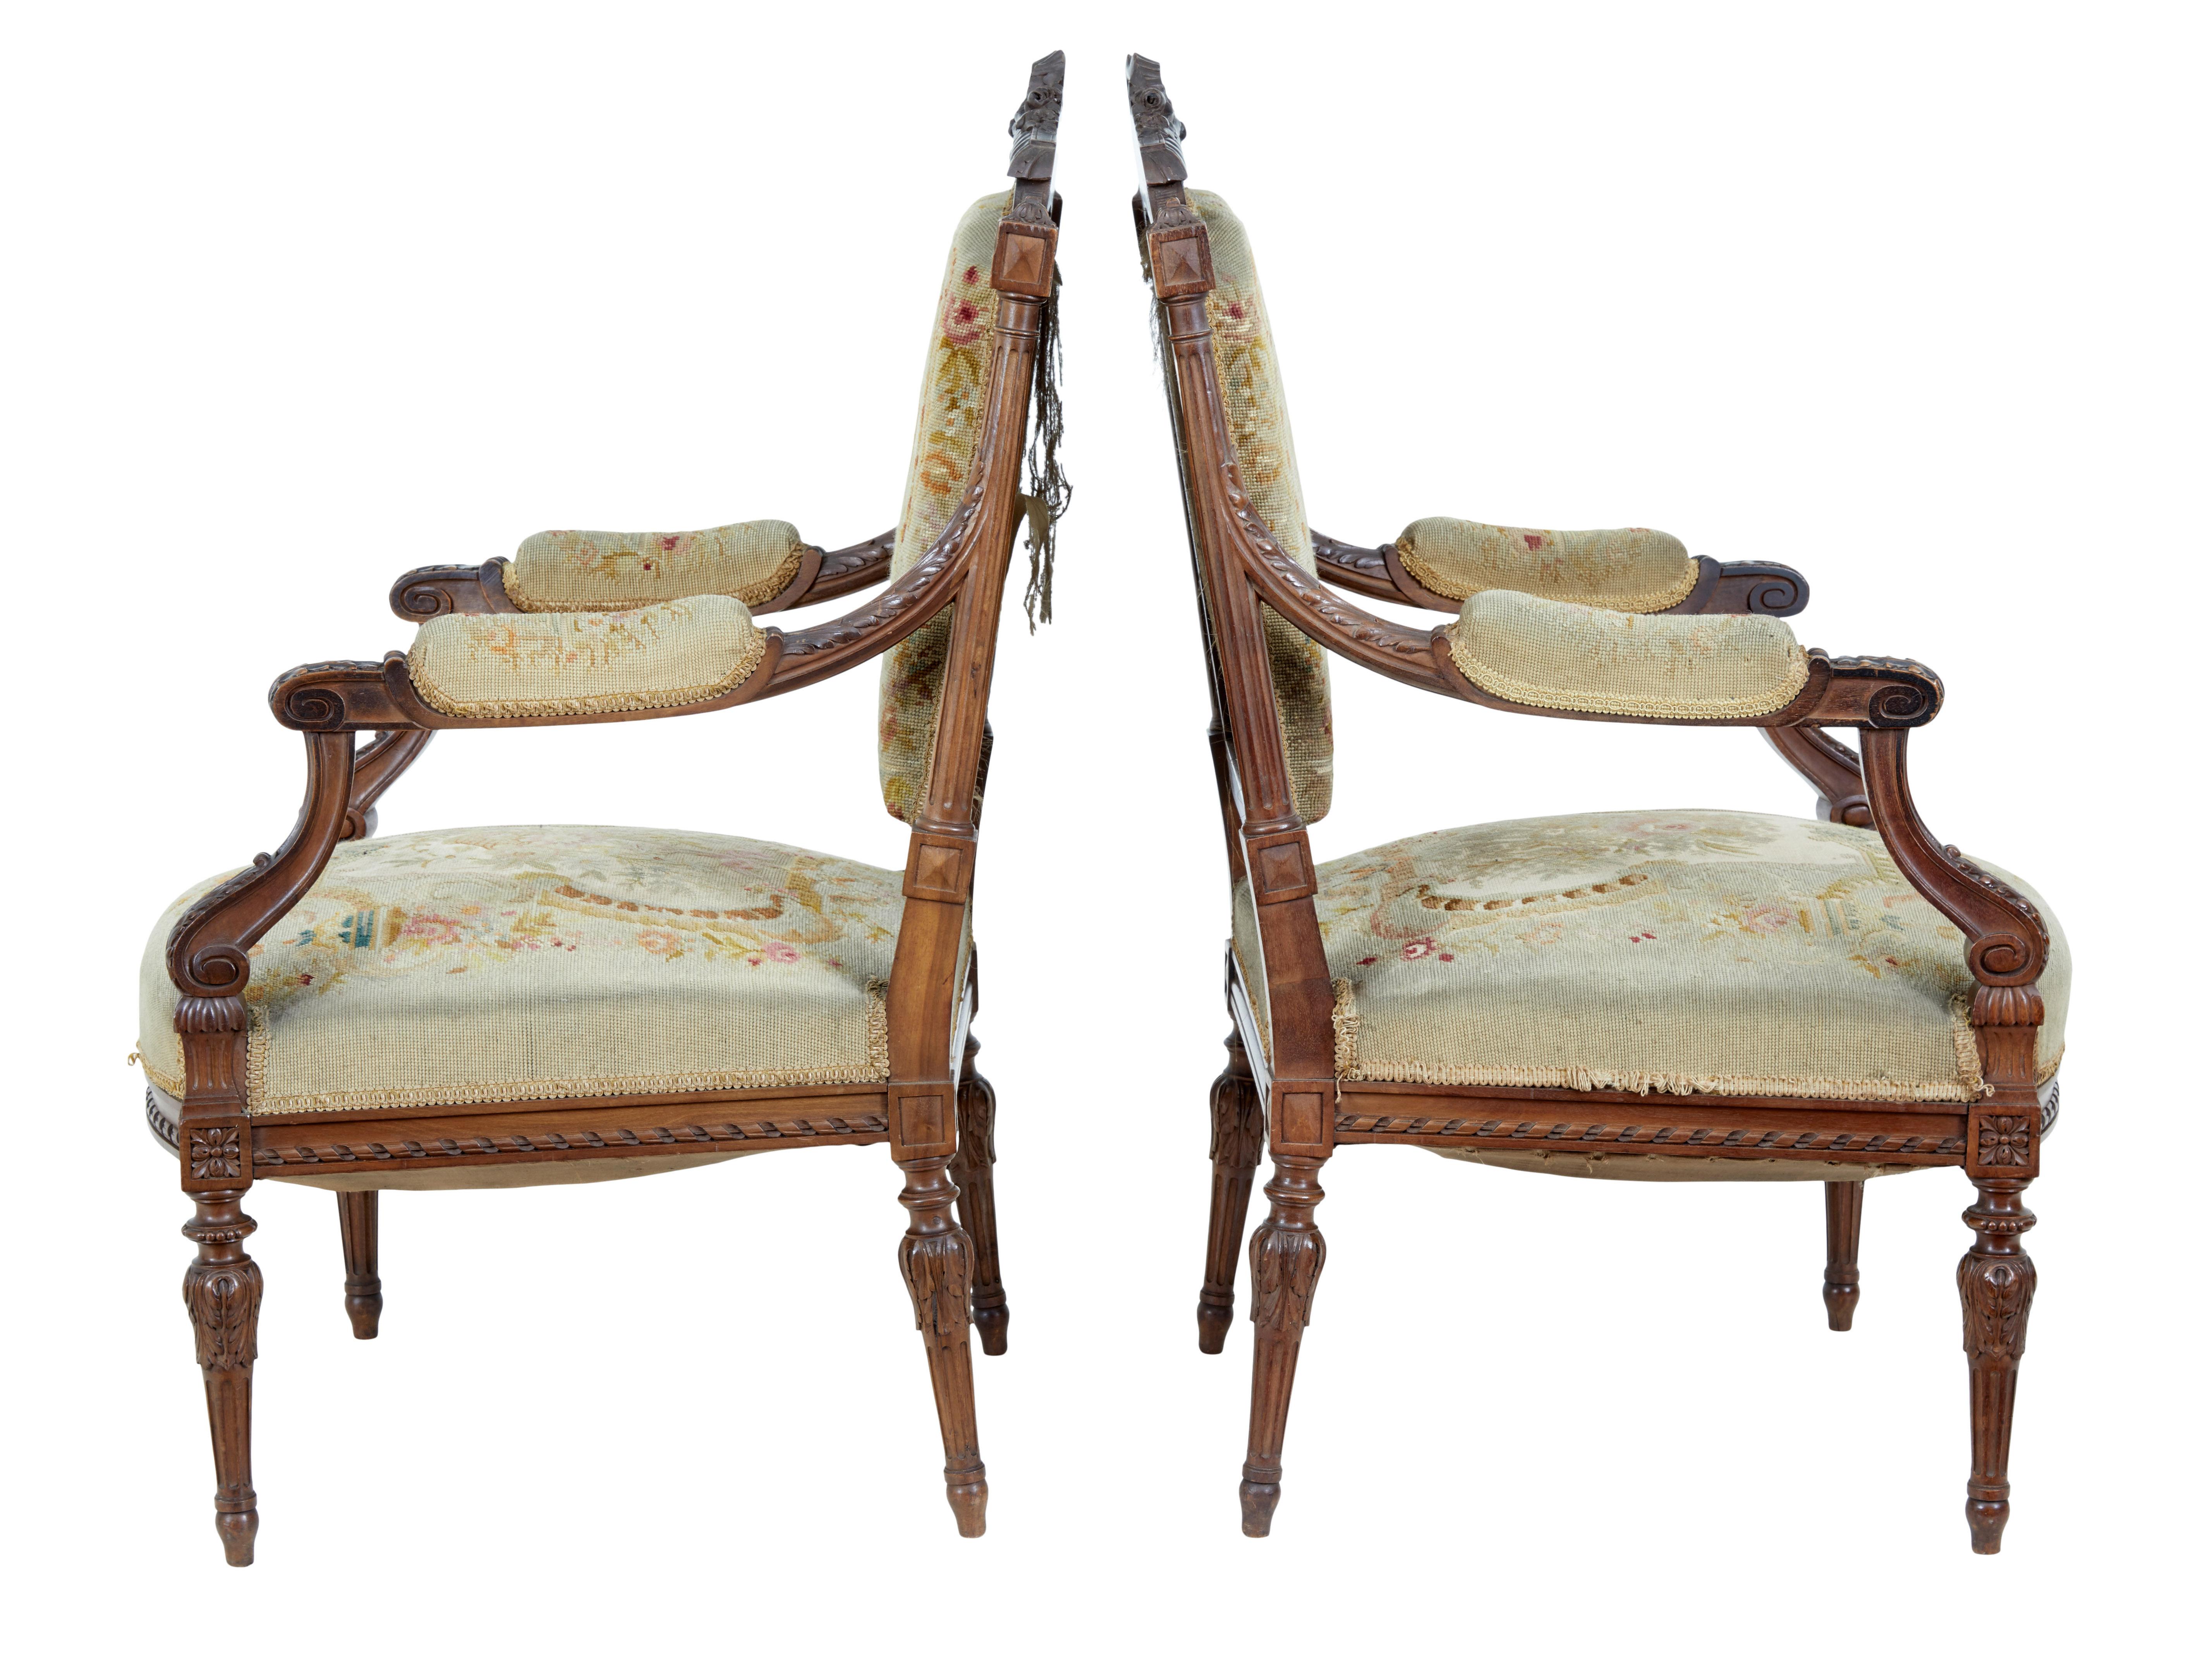 19th century French carved walnut tapestry armchairs circa 1870.

Fine quality pair of french carved armchairs, with fine craftsmanship shown in the quality of the carving.

Heavily carved back rests, carved scrolled arms with acanthus leaf